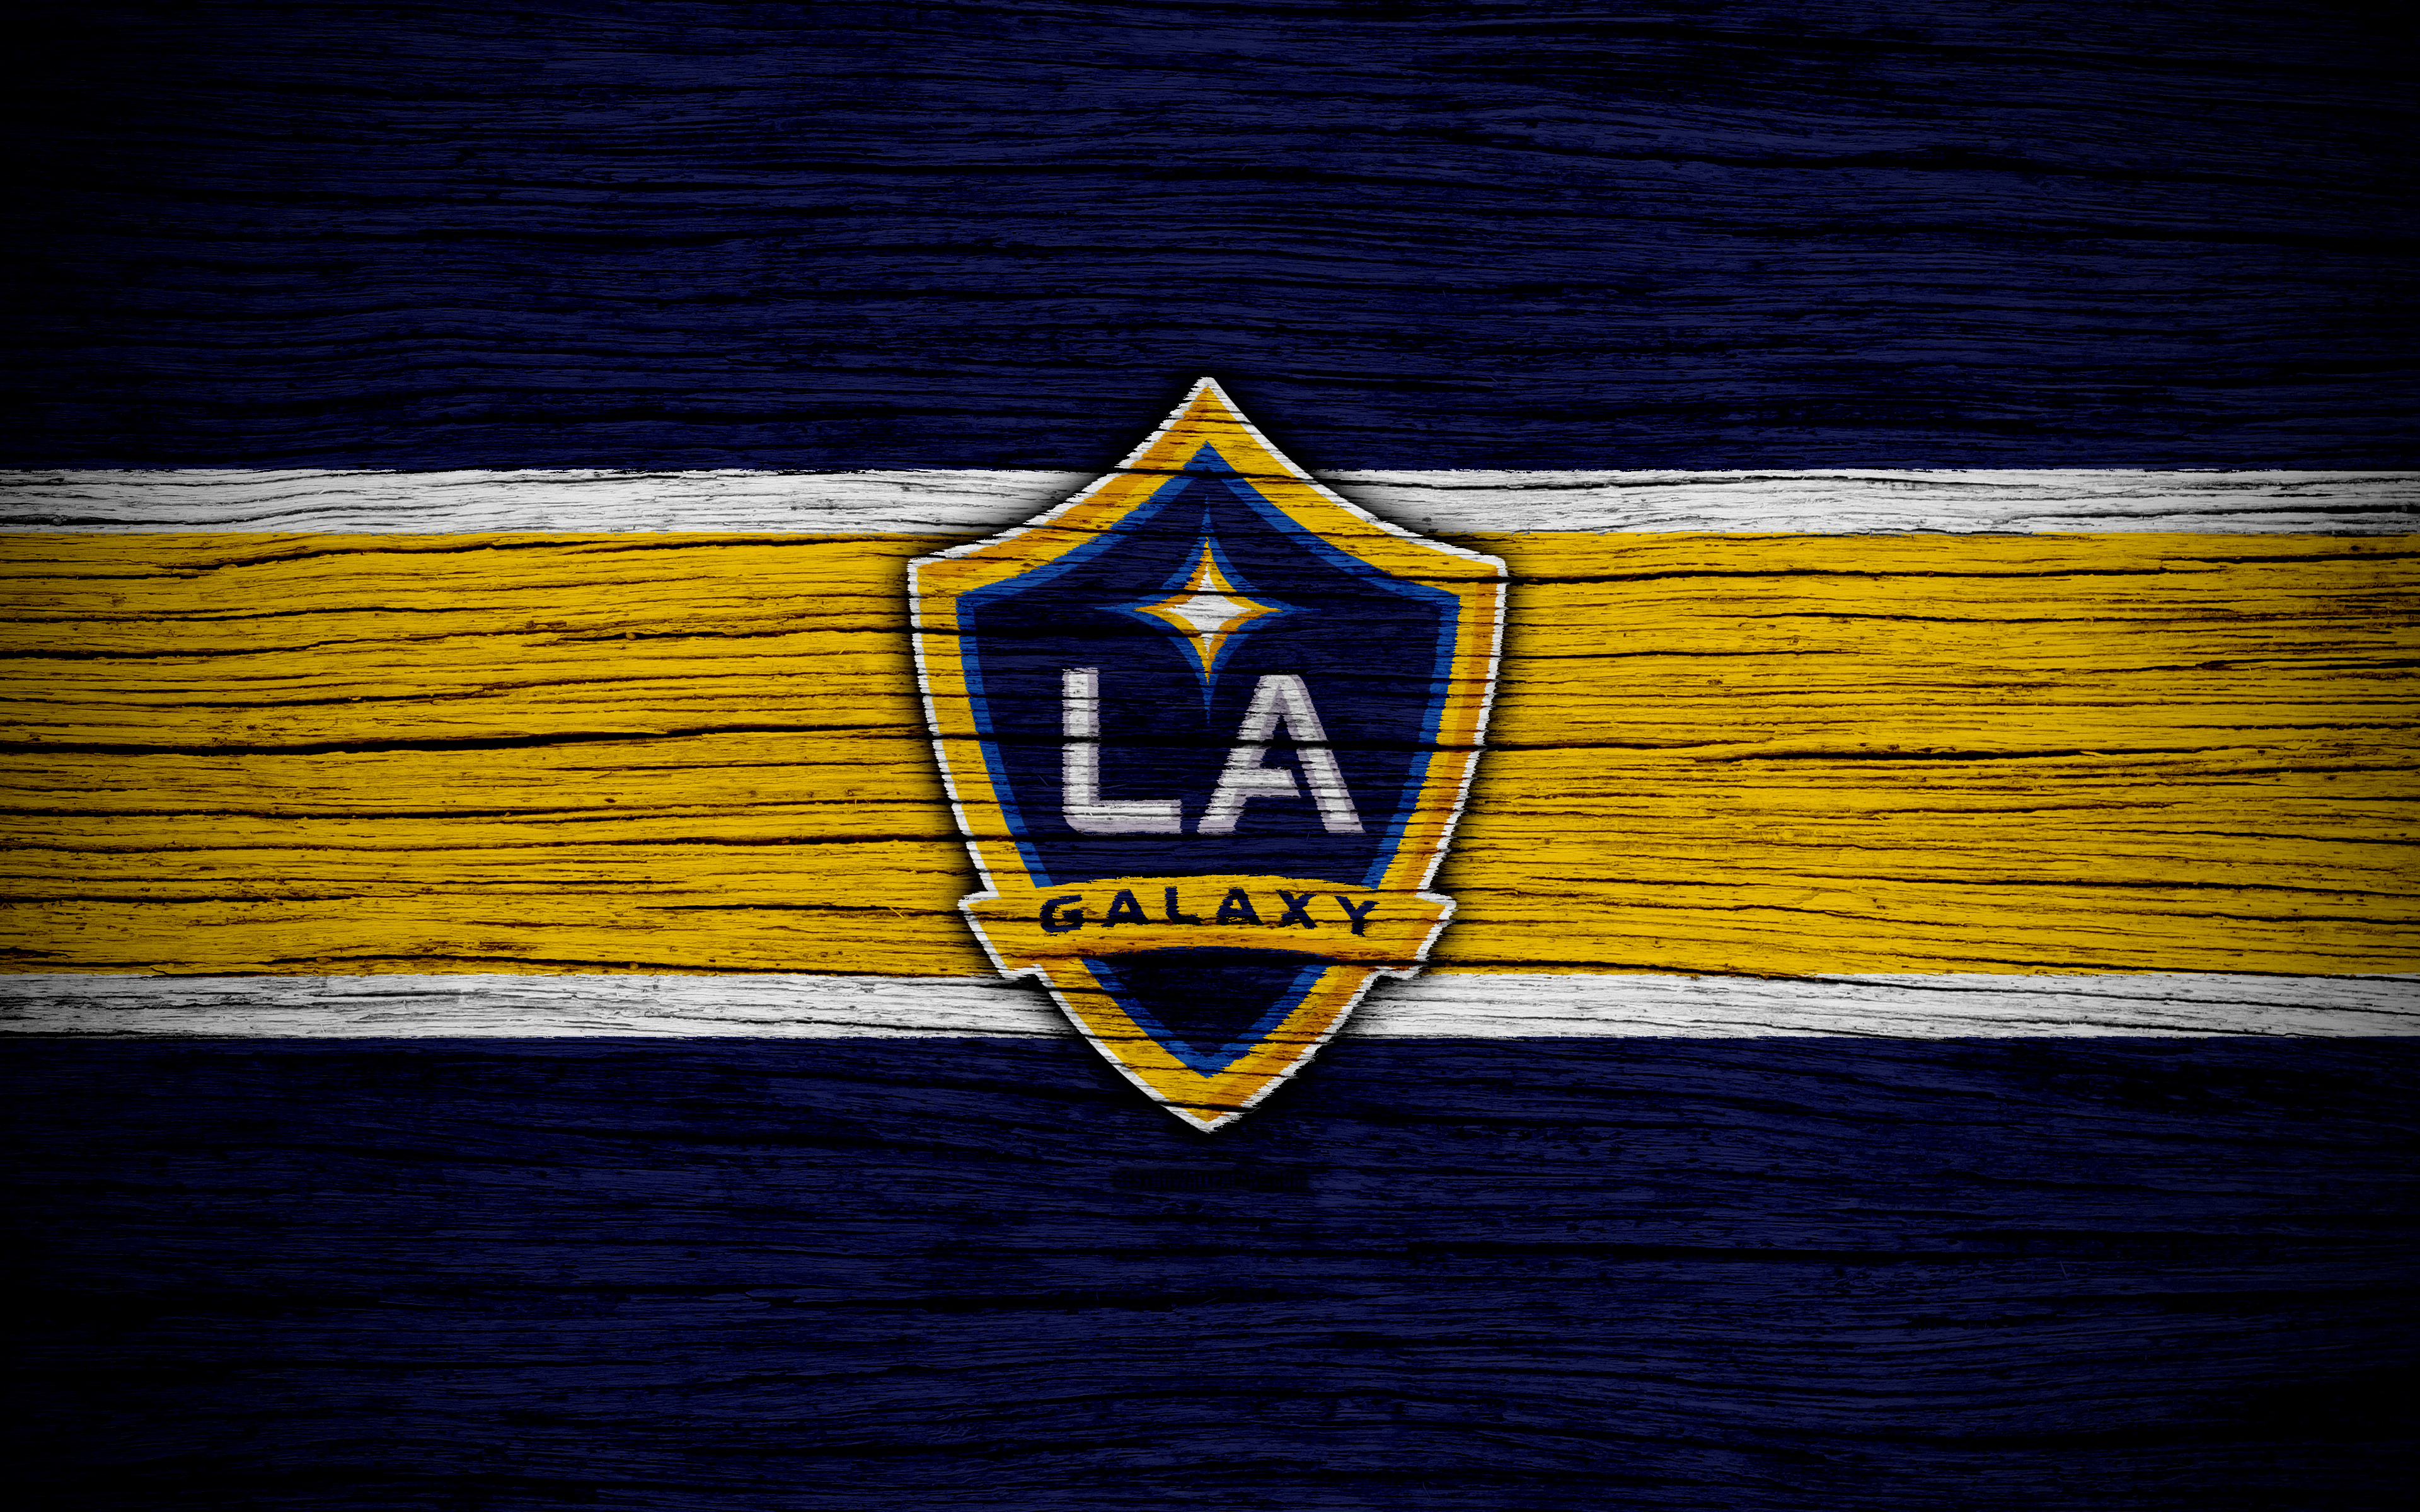 Download wallpaper Los Angeles Galaxy, 4k, MLS, wooden texture, Western Conference, football club, USA, Los Angeles Galaxy FC, soccer, LA Galaxy, logo, FC Los Angeles Galaxy for desktop with resolution 3840x2400. High